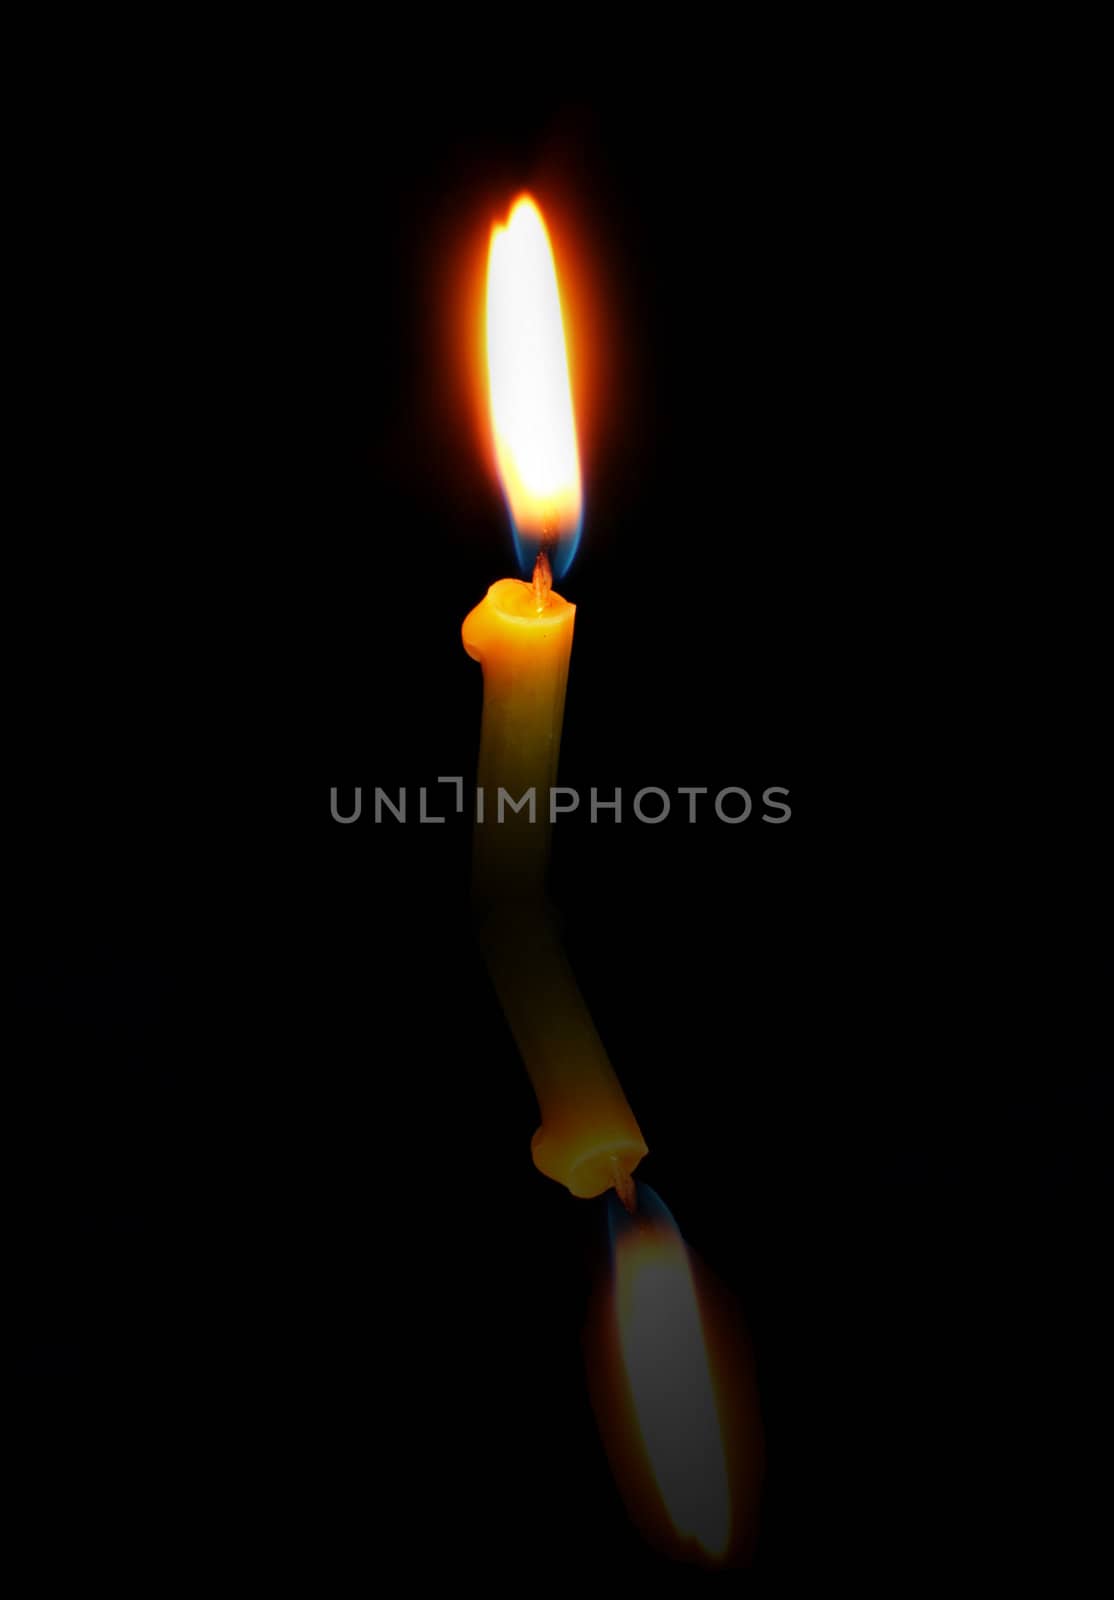 Church Candle with a reflection on a black background by schankz